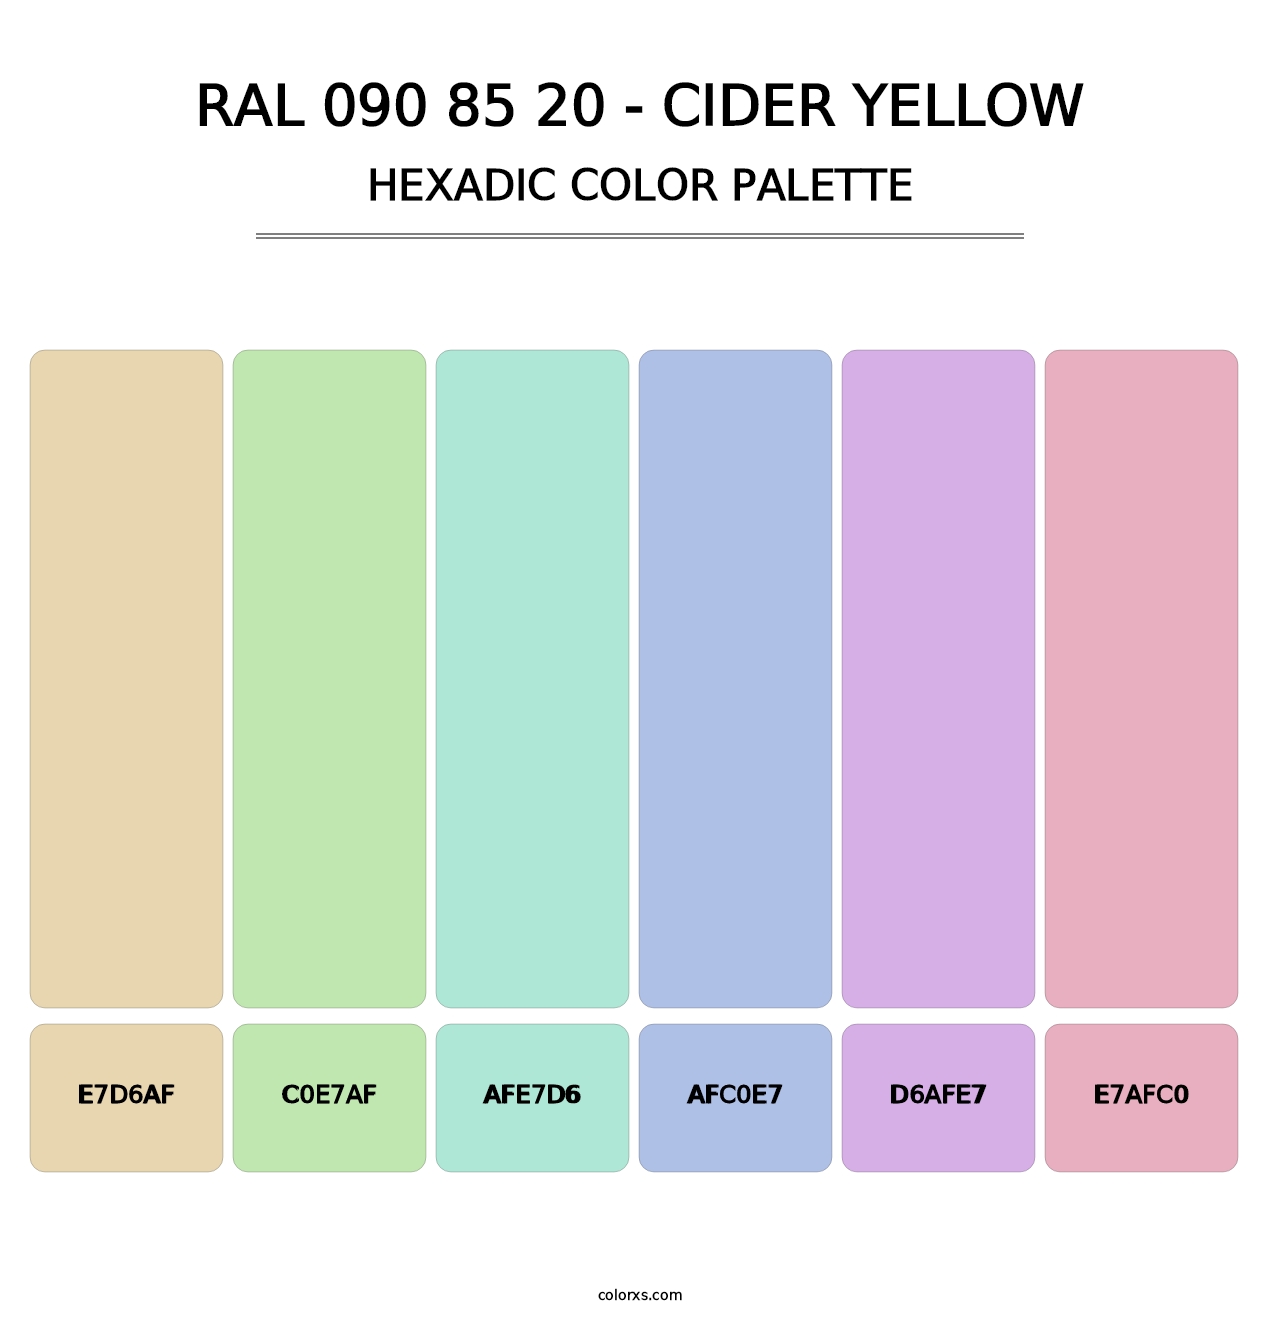 RAL 090 85 20 - Cider Yellow - Hexadic Color Palette